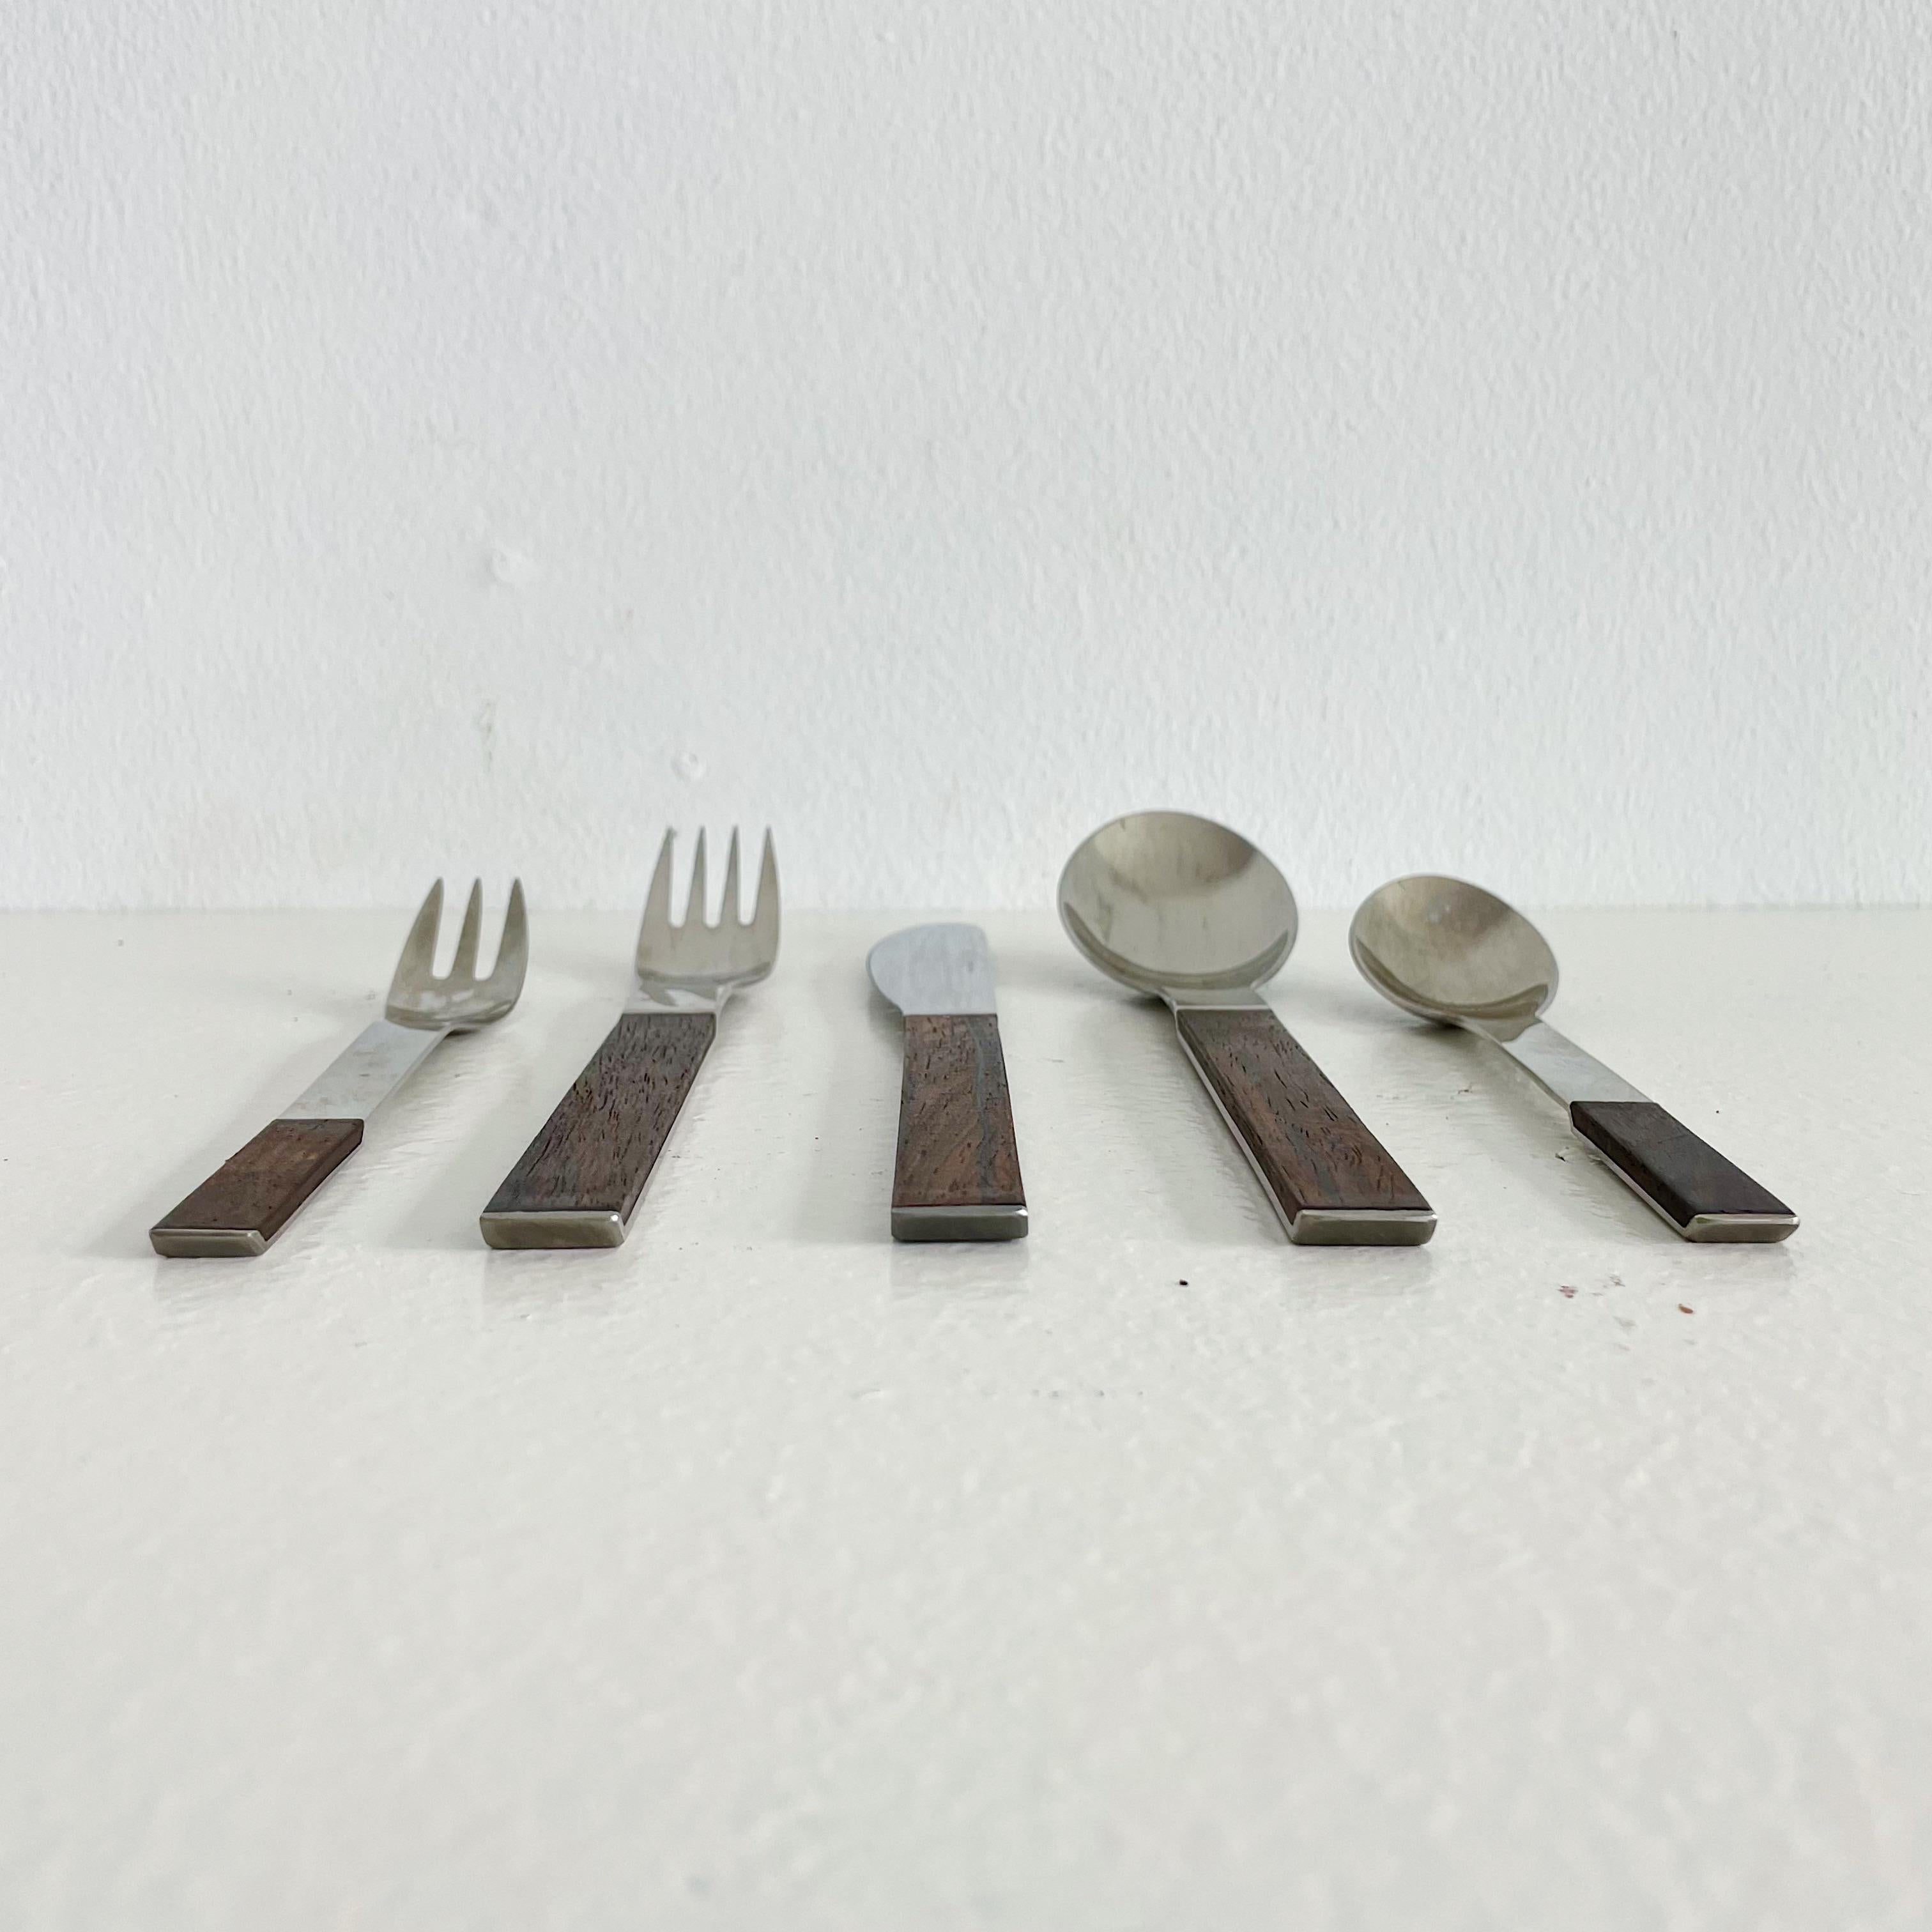 Exceptional rosewood and stainless steel flatware set 'Duo' for 8 place settings designed by Carl Auböck and made by for Rosenthal Austria, circa 1967. Each set is comprised of five pieces (fork, knife, spoon, salad or dessert fork, teaspoon) a